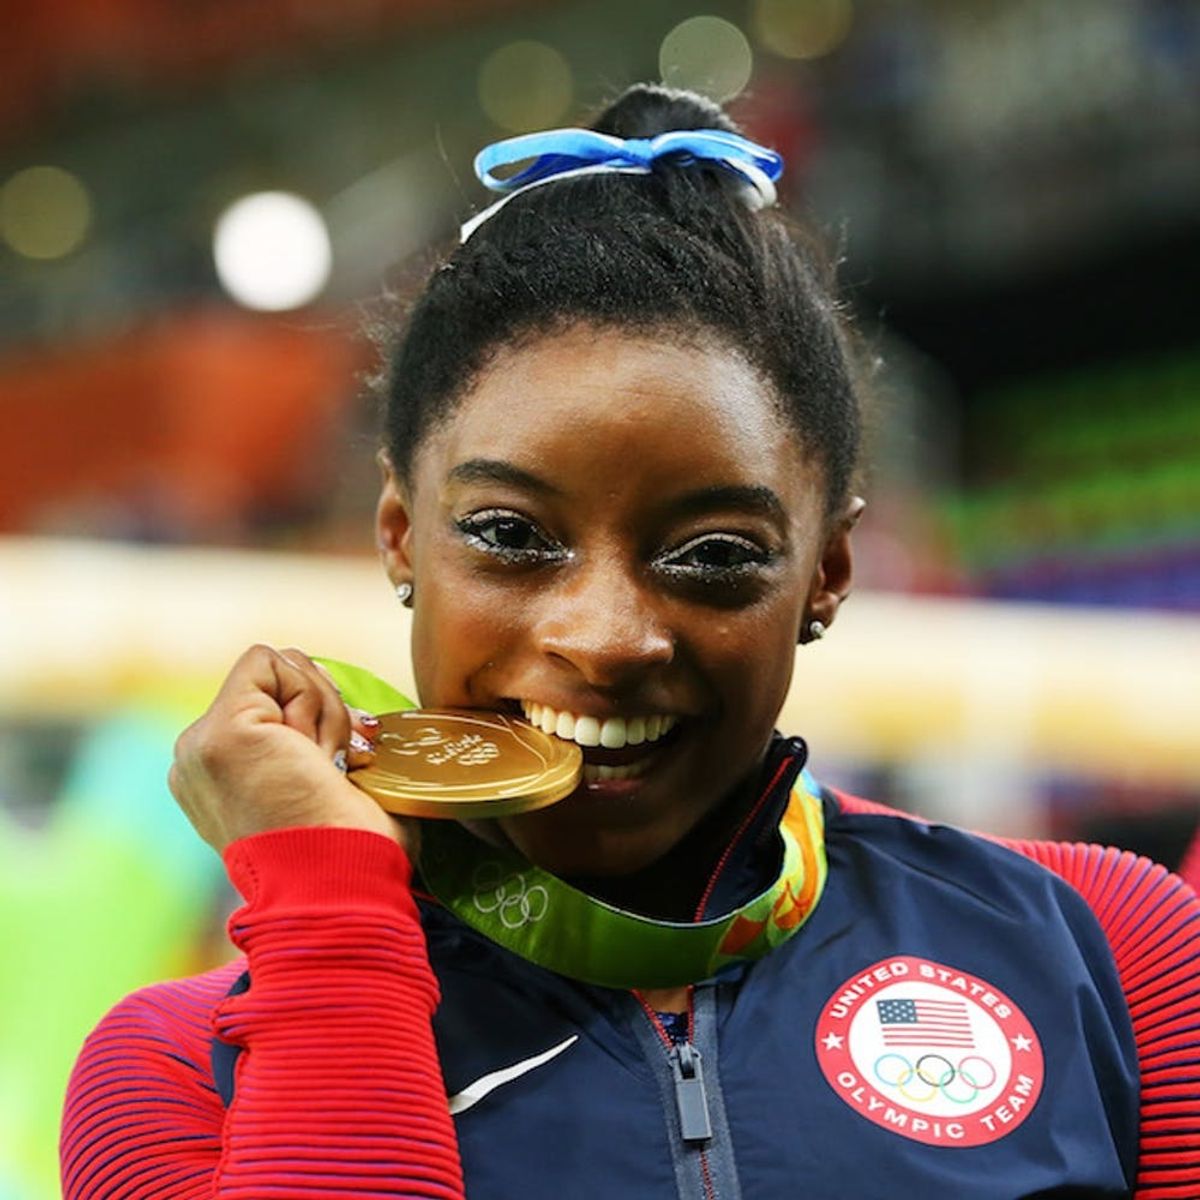 8 Times Simone Biles Brought So Much Joy to Our Lives in 2016